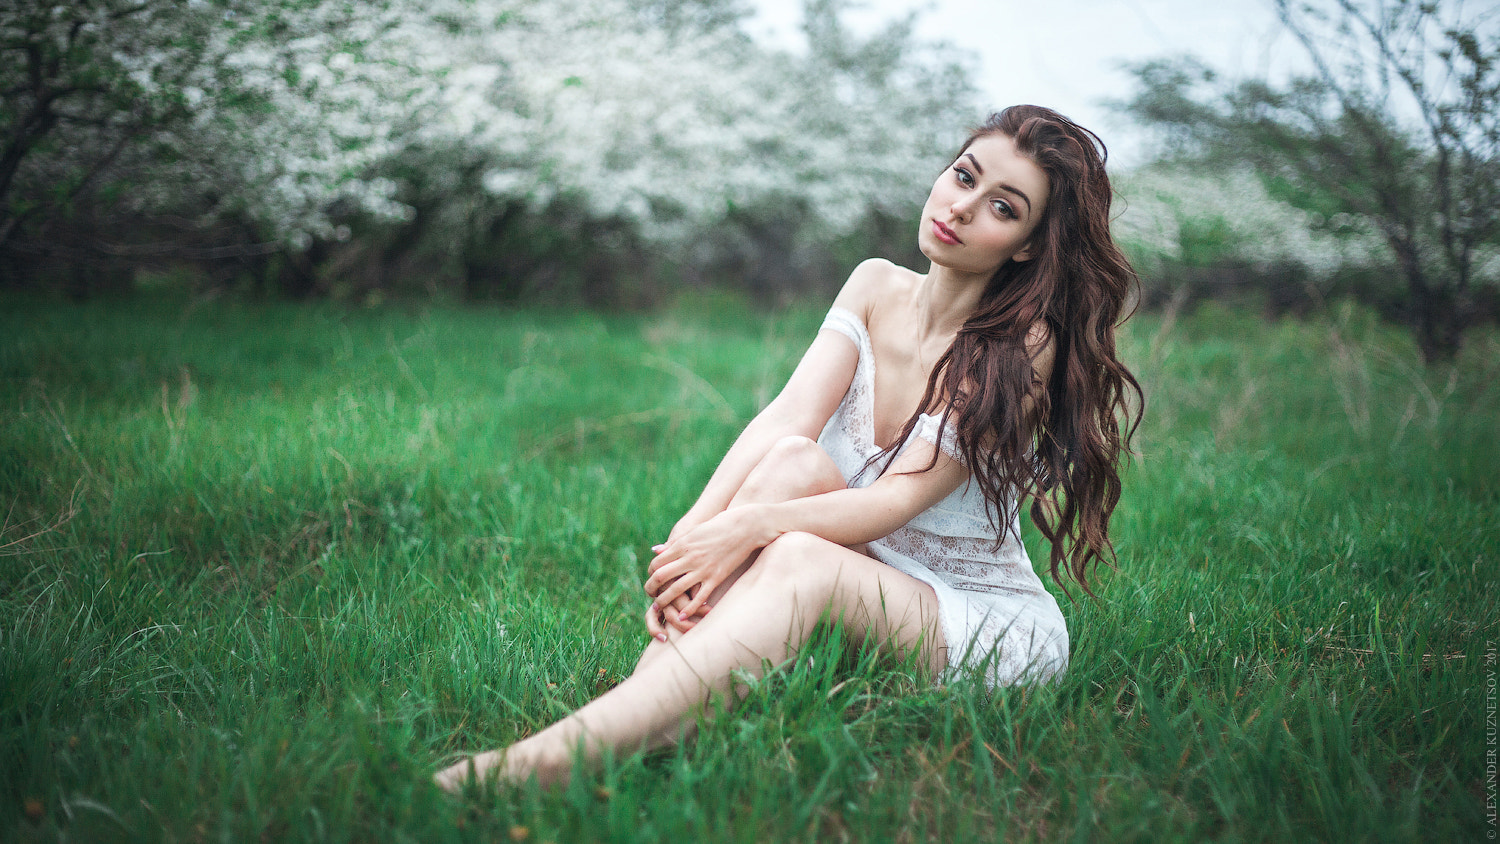 People 1500x844 Alexander Kuznetsov women brunette long hair wavy hair bare shoulders outdoors grass legs looking at viewer makeup see-through clothing cleavage lace barefoot long eyelashes eyeliner lipstick smiling model women outdoors